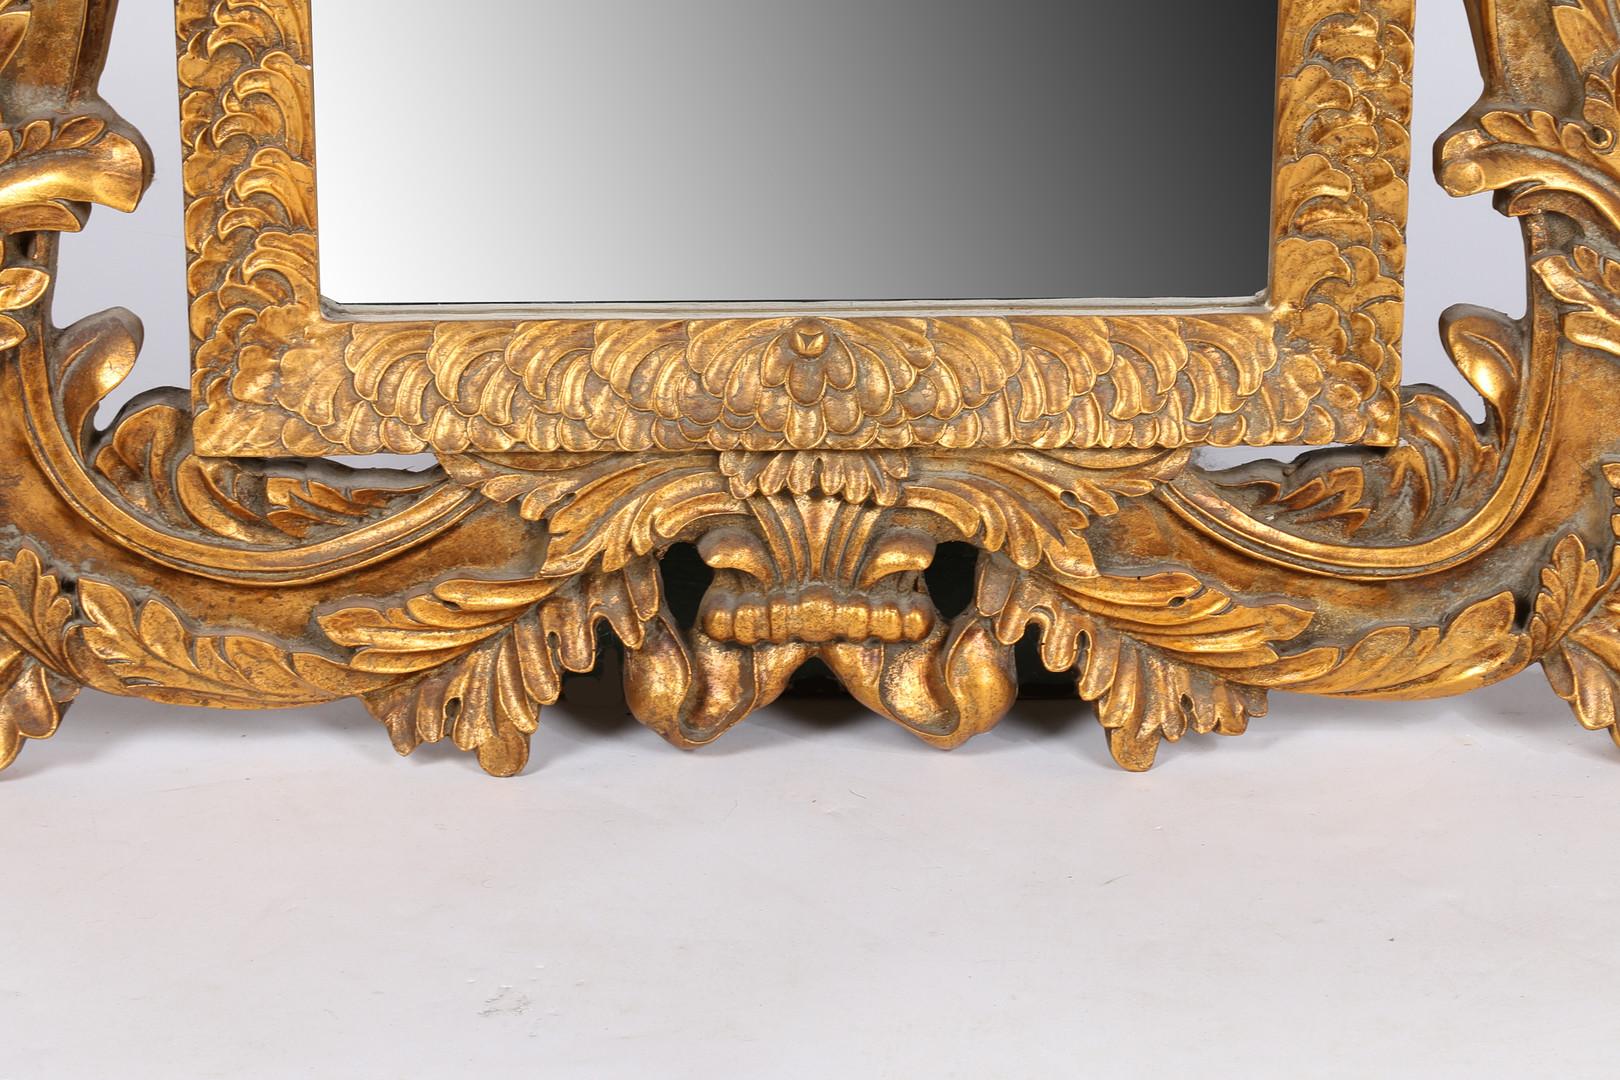 A rare large 20th-century English gilt wall mirror, having a scroll frame above a rectangular bevelled glass plate, 117cm by 84cm.
This mirror can be suitable as a console and pier mirror as well.